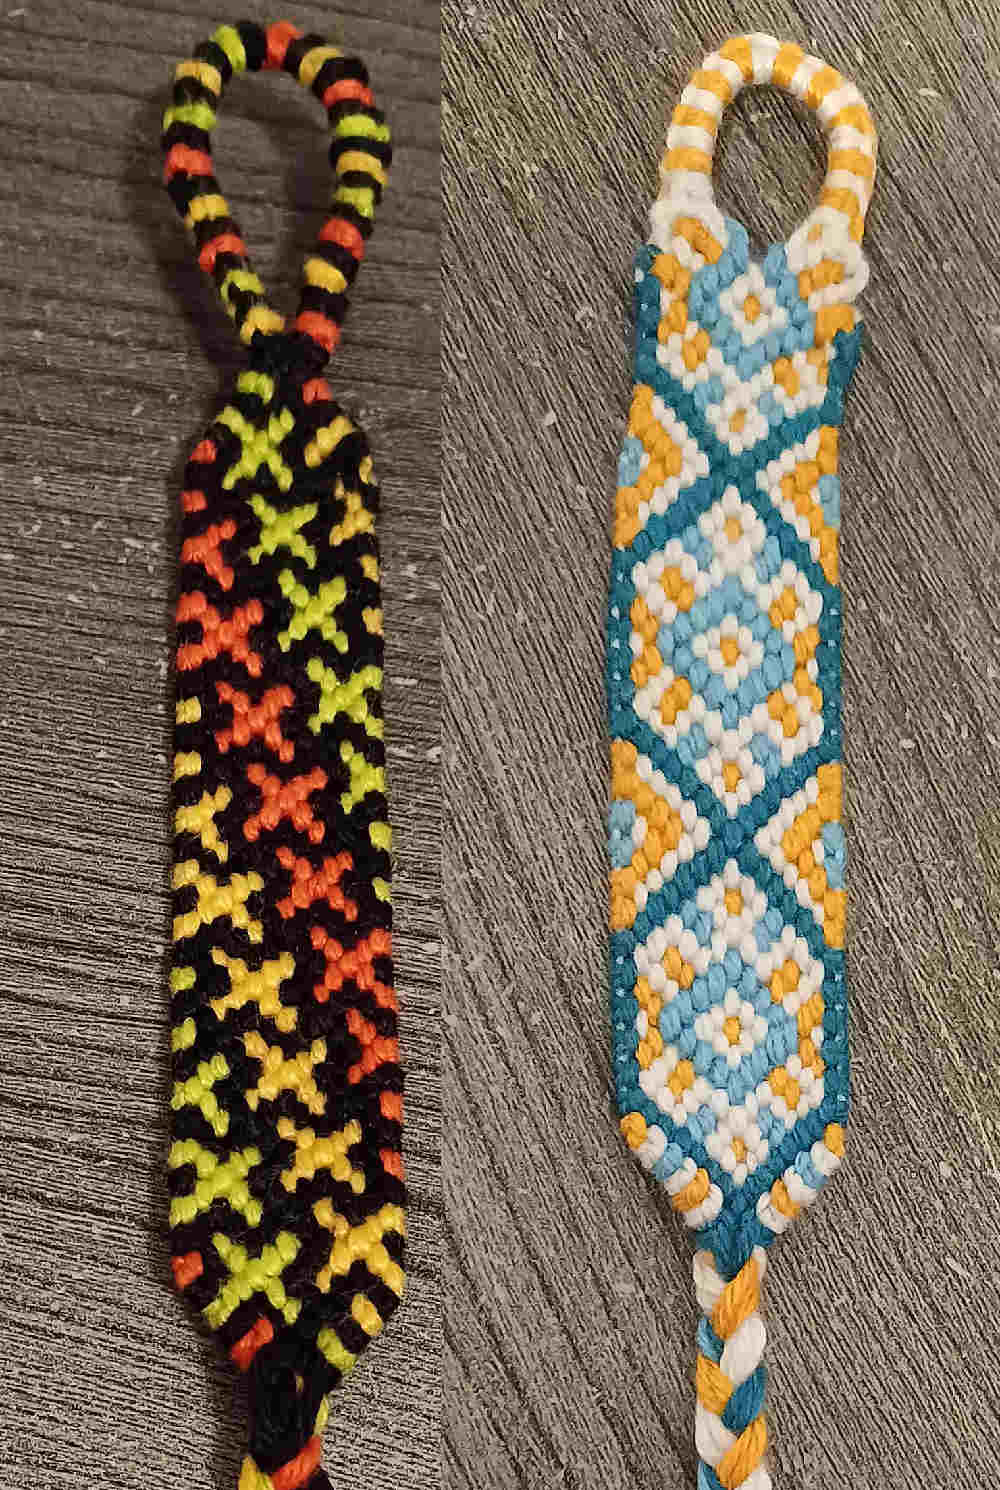 2 bracelets. one is black, with yellow, orange and green crosses, the other is gold, white, and teal.